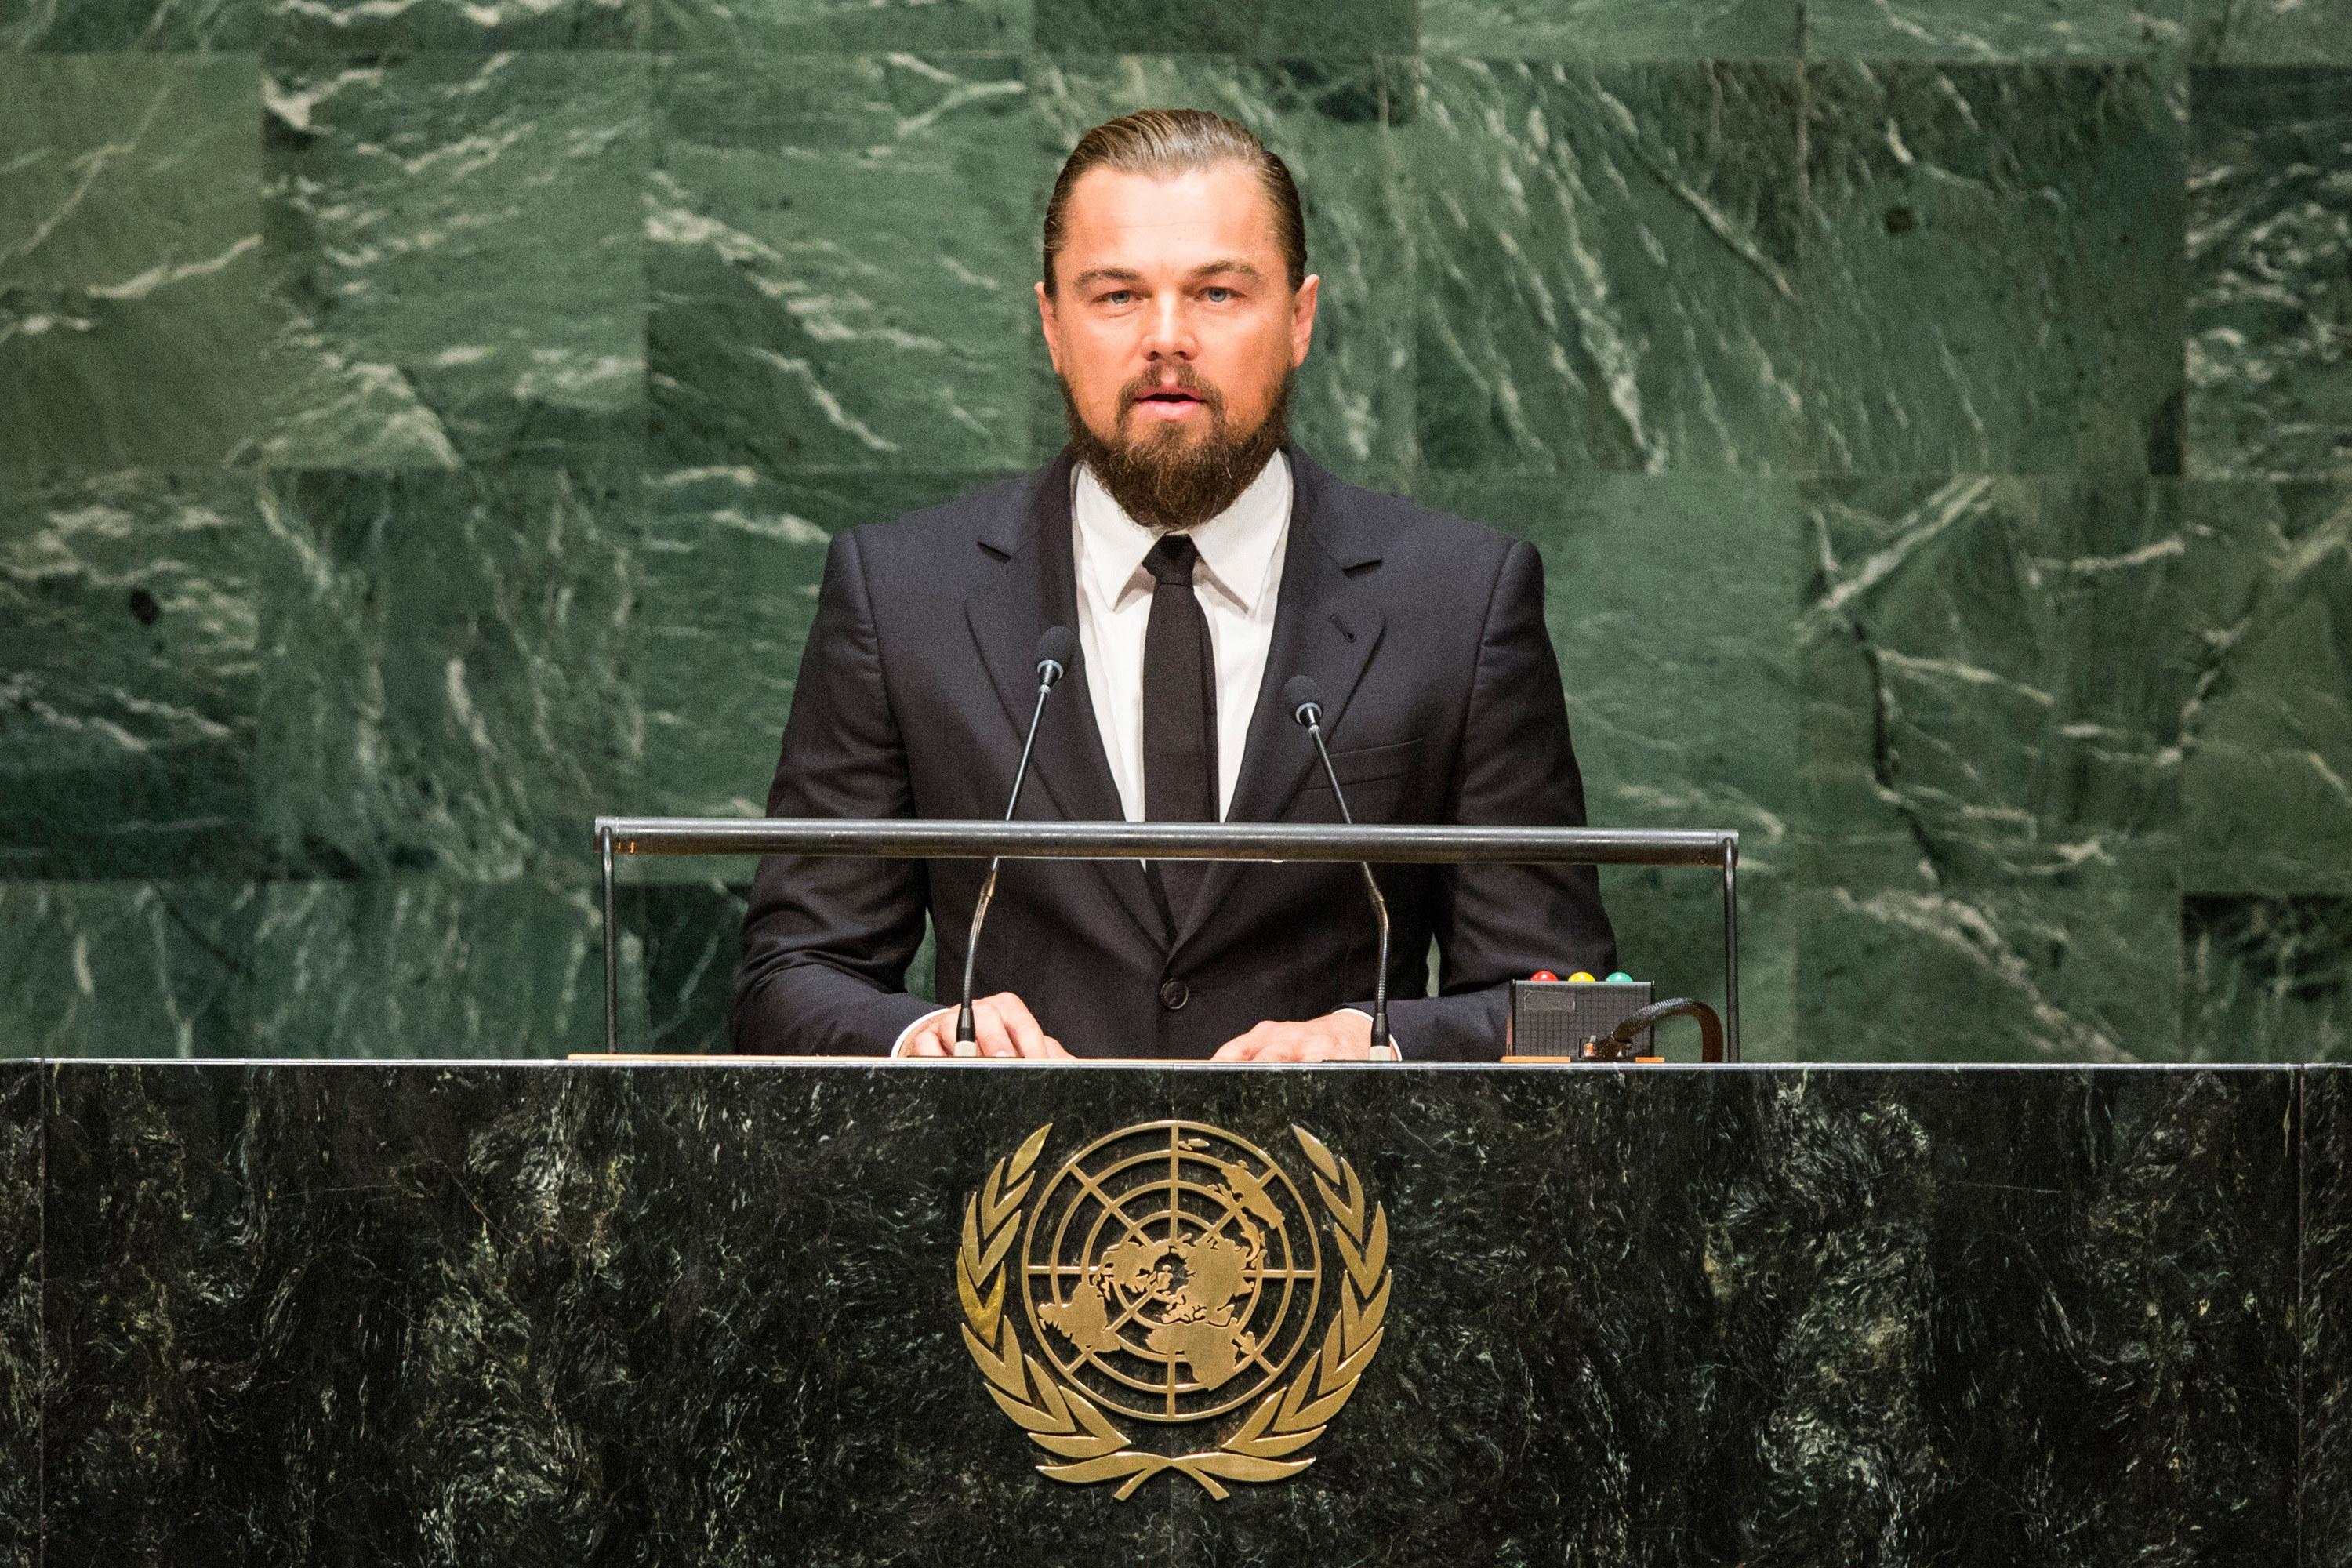 Actor Leonardo DiCaprio speaks at the United Nations Climate Summit on September 23, 2014 in New York City